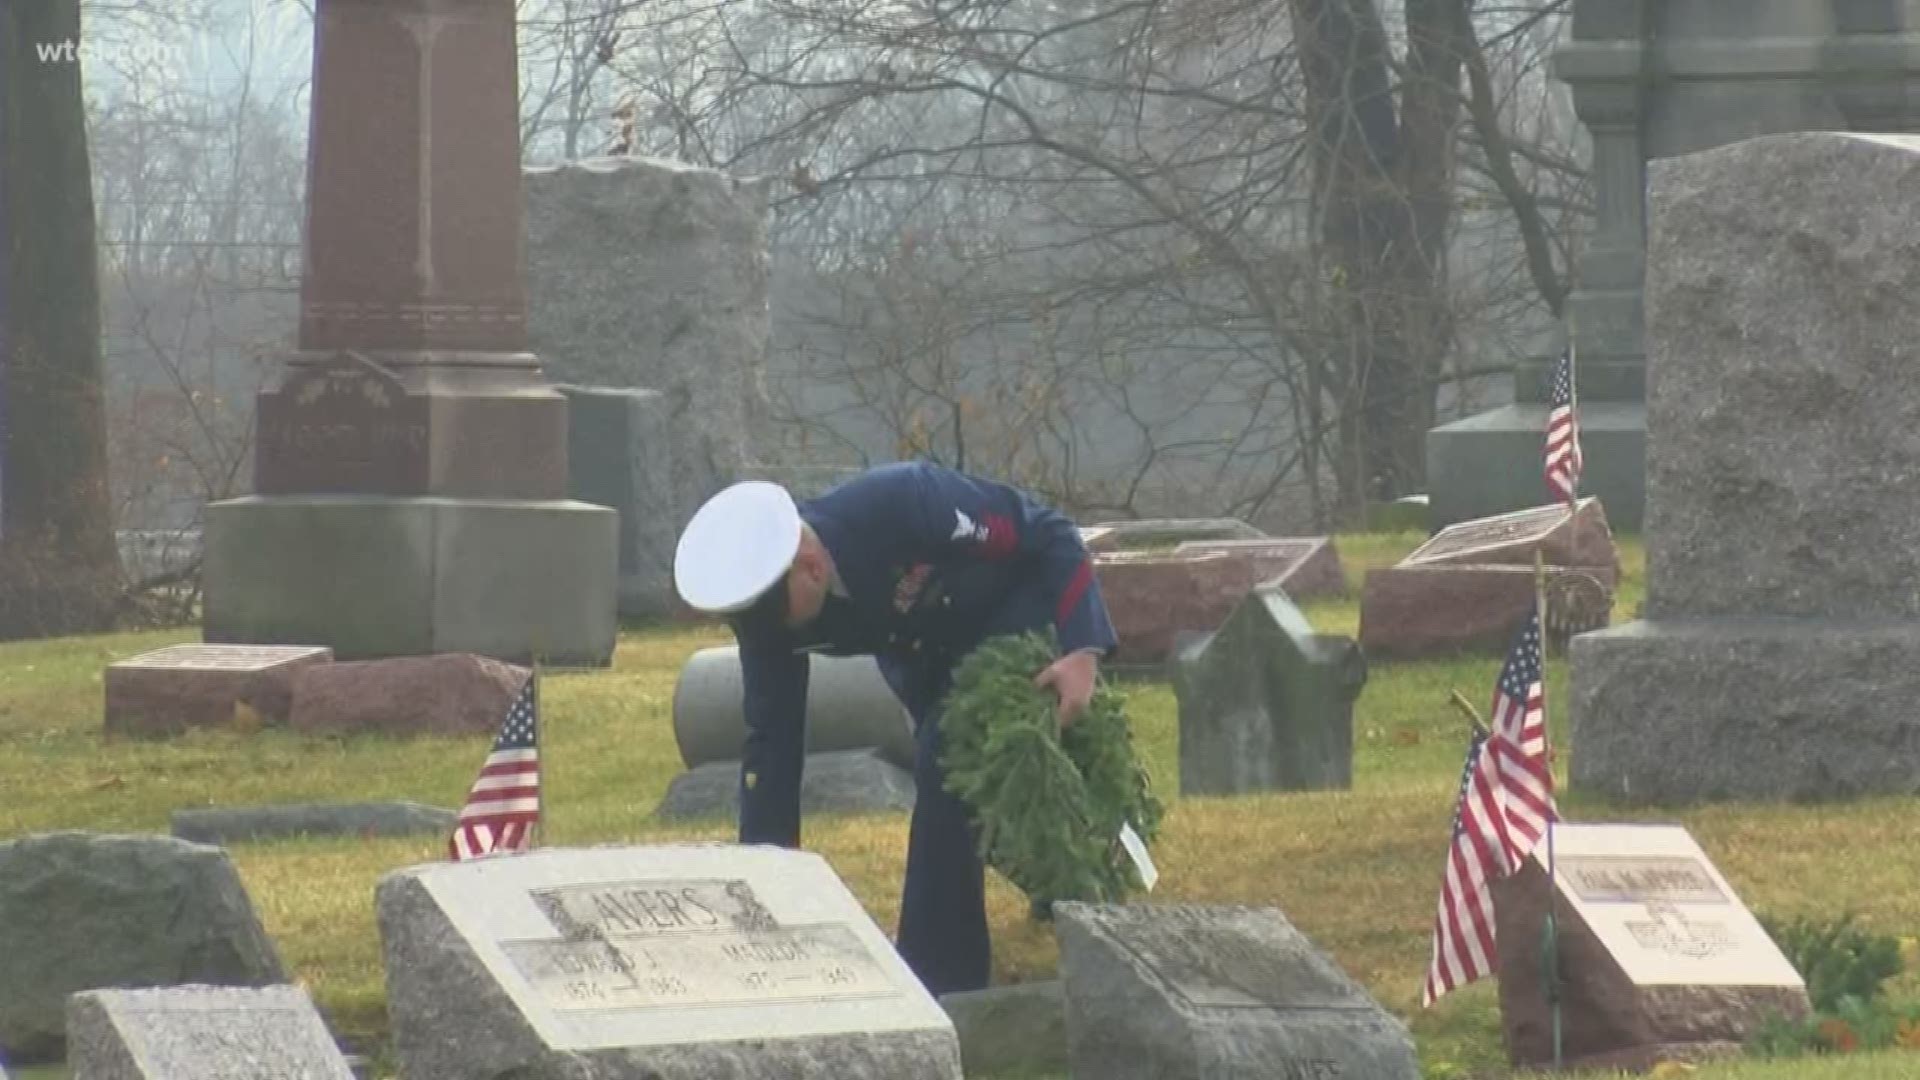 Photojournalist Kenny Kruse was in Elmore checking out the solemn scene as people honored American heroes. He shows us the sights and sounds of the scene.